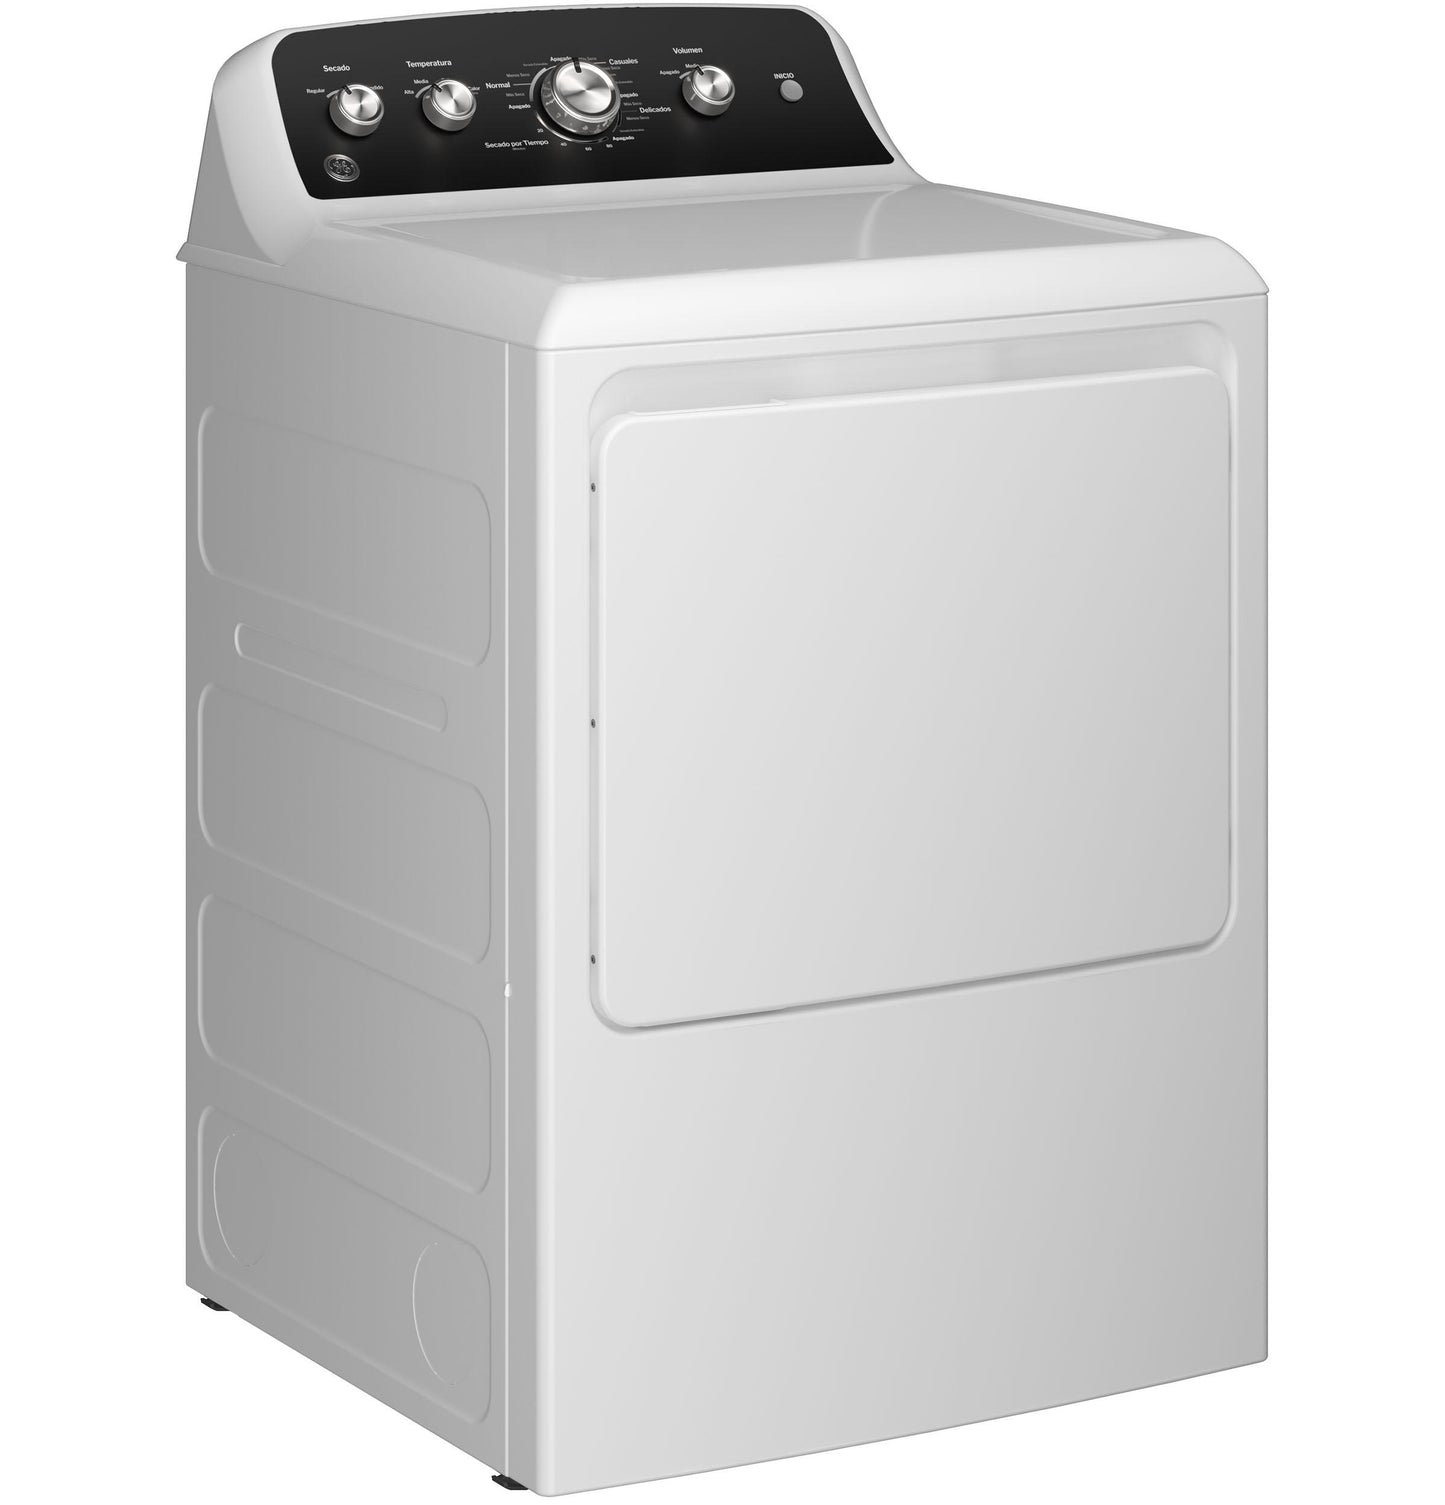 Ge Appliances ETD48EASWWB Ge® 7.2 Cu. Ft. Capacity&#X00A0;Electric&#X00A0;Dryer&#X00A0;With Spanish Panel And Up To 120 Ft. Venting&#X200B;